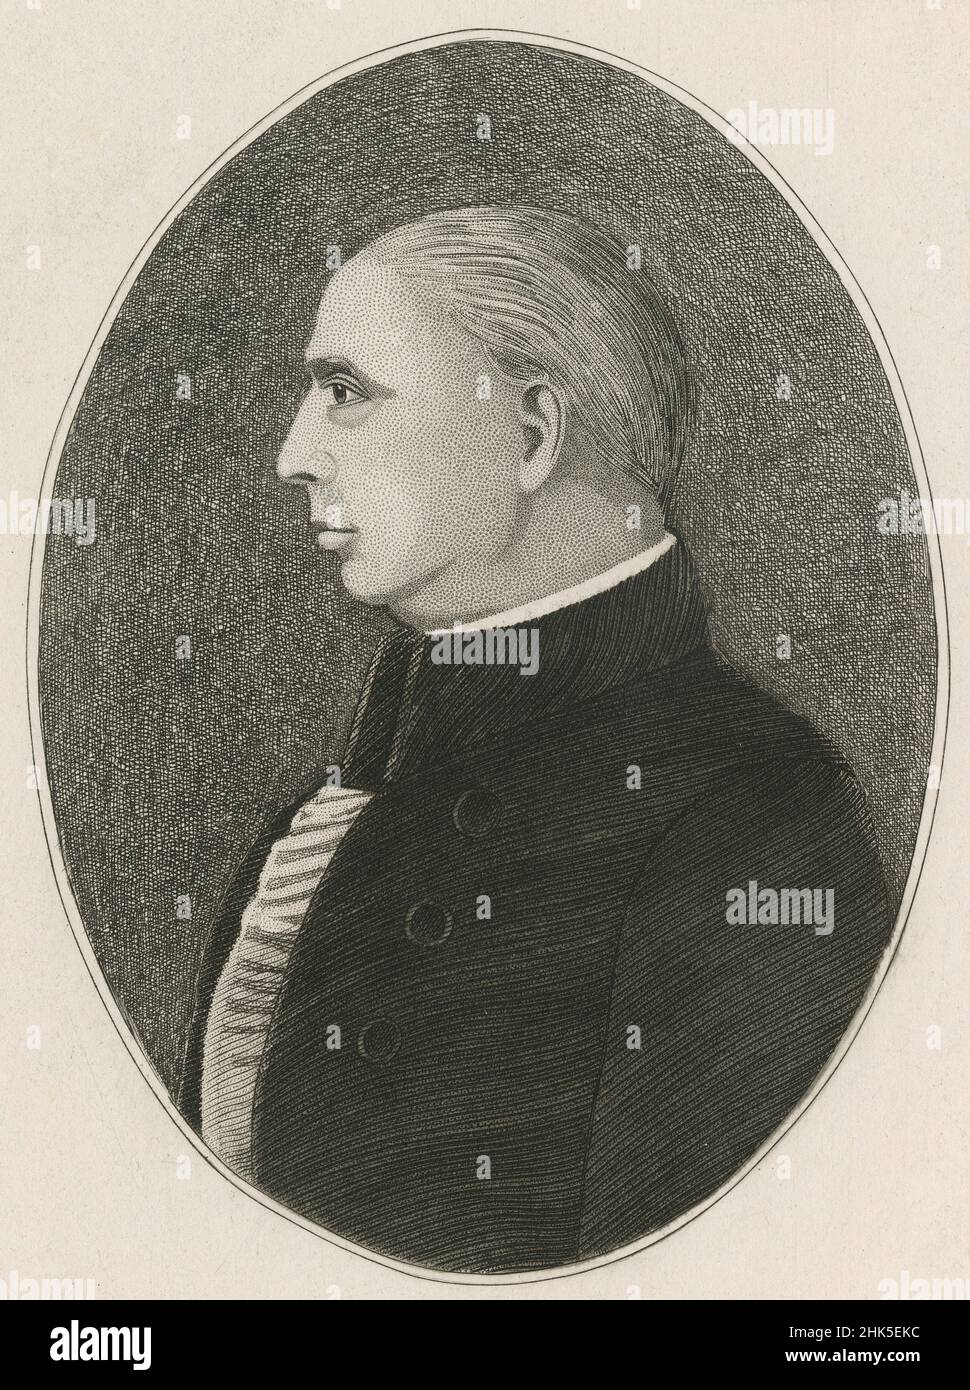 Antique circa 1850 engraving of Rufus Putnam. Brigadier-General Rufus Putnam (1738-1824) was a colonial military officer during the French and Indian War, and a general in the Continental Army during the American Revolutionary War. SOURCE: ORIGINAL ENGRAVING Stock Photo